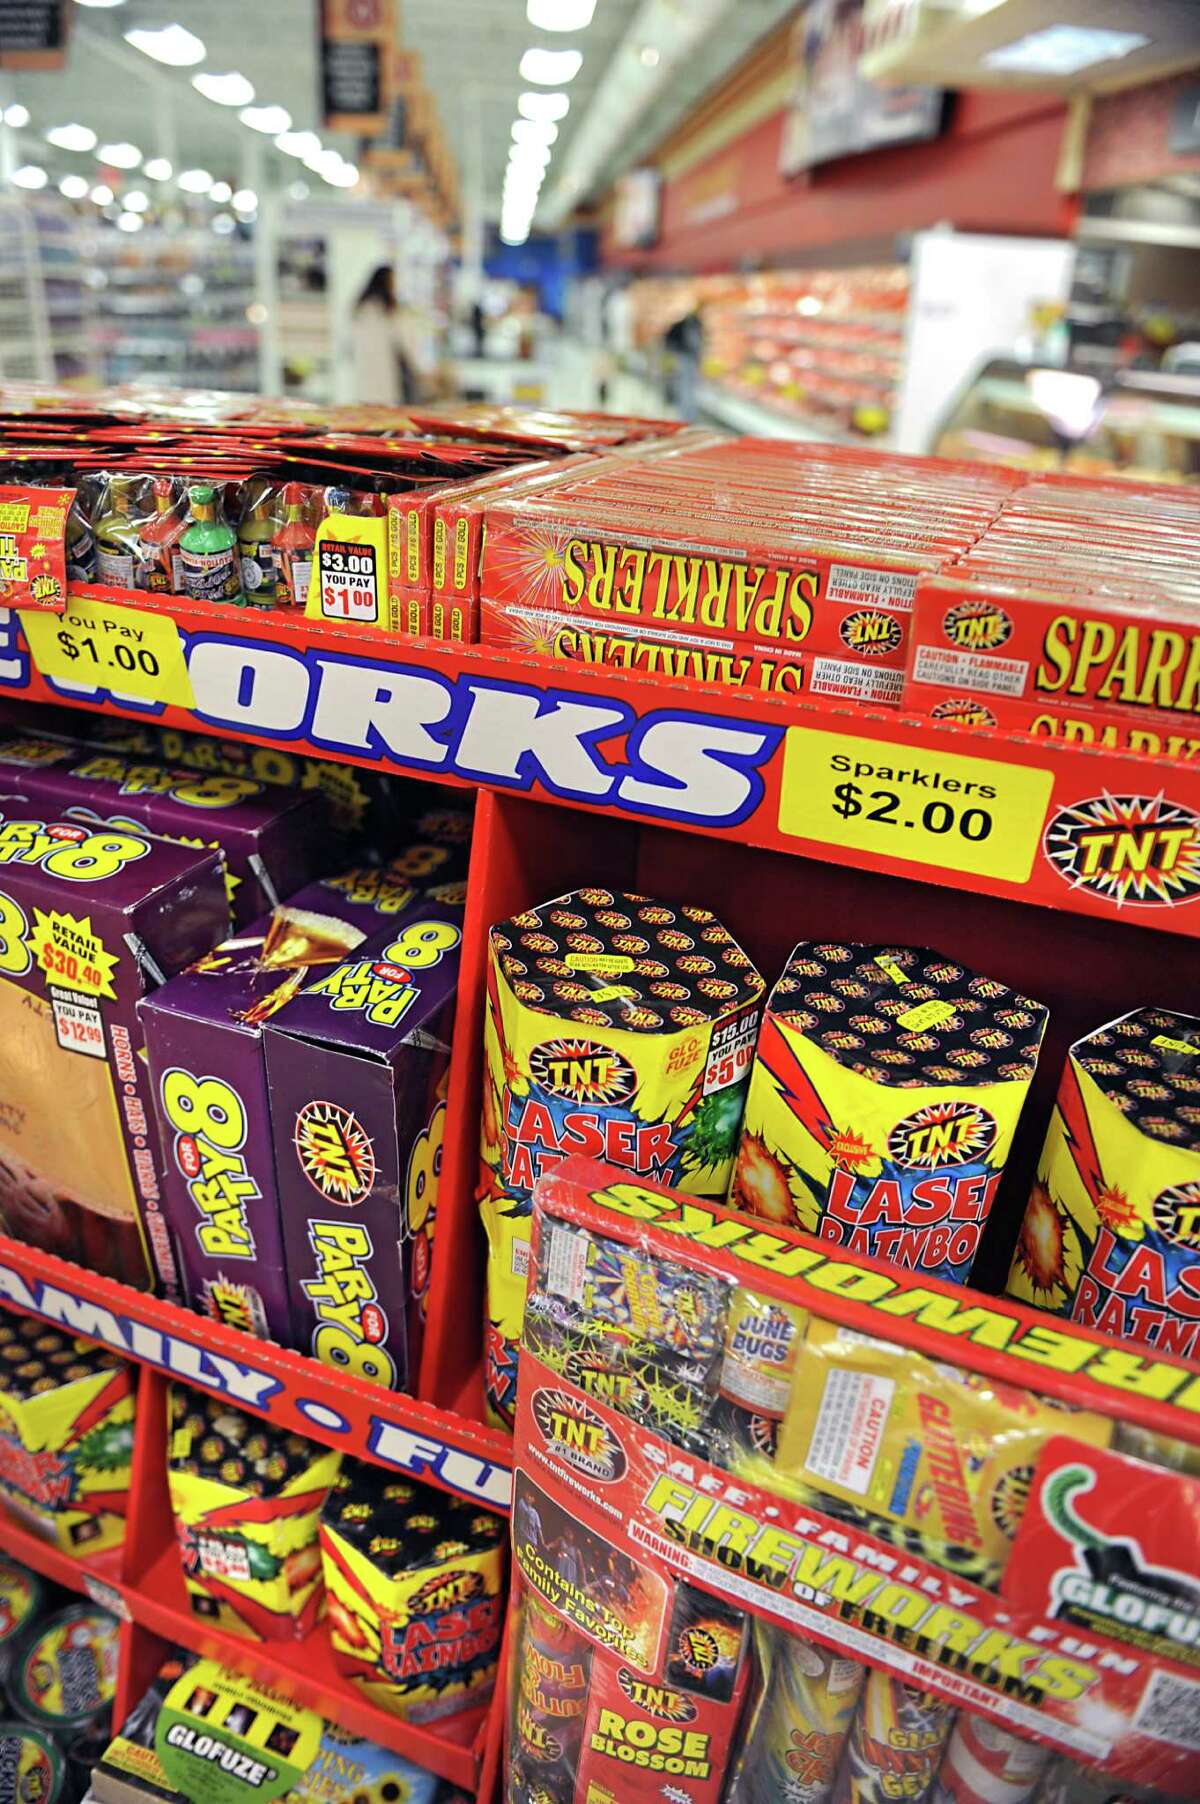 A display of fireworks is seen at Price Chopper on Hoosick Rd. on Tuesday, Dec. 29, 2015 in Brunswick, N.Y. Fireworks such as sparklers are on sale during the New Years Eve period under a new state law. Warren County banned firework sales on Friday.  (Lori Van Buren / Times Union)